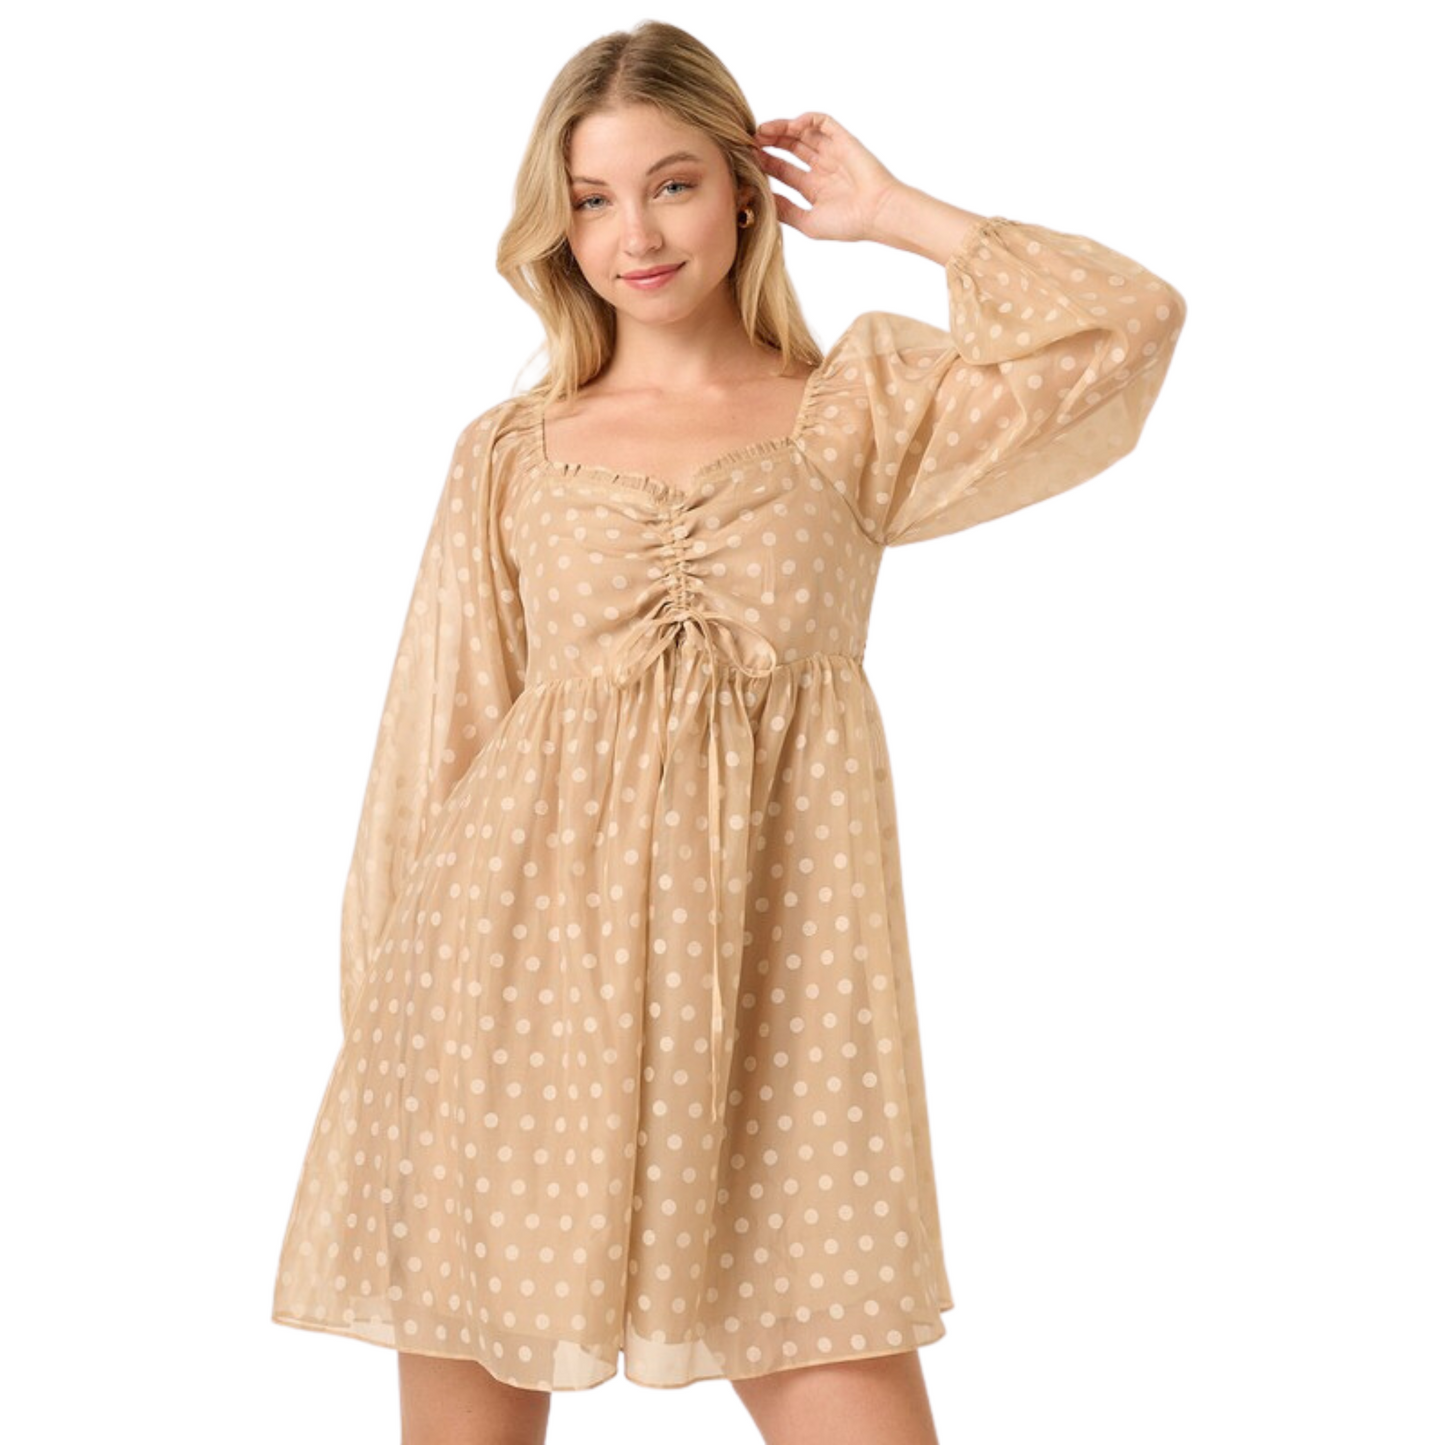 Look sharp in this Dot Jacquard Babydoll dress, crafted with a organza woven fabric. The dress features a princess neckline, long sleeves, ruching detail on the yoke, and a mini length. The sophisticated mocha color creates a timeless, yet stylish ensemble you'll want to wear over and over.